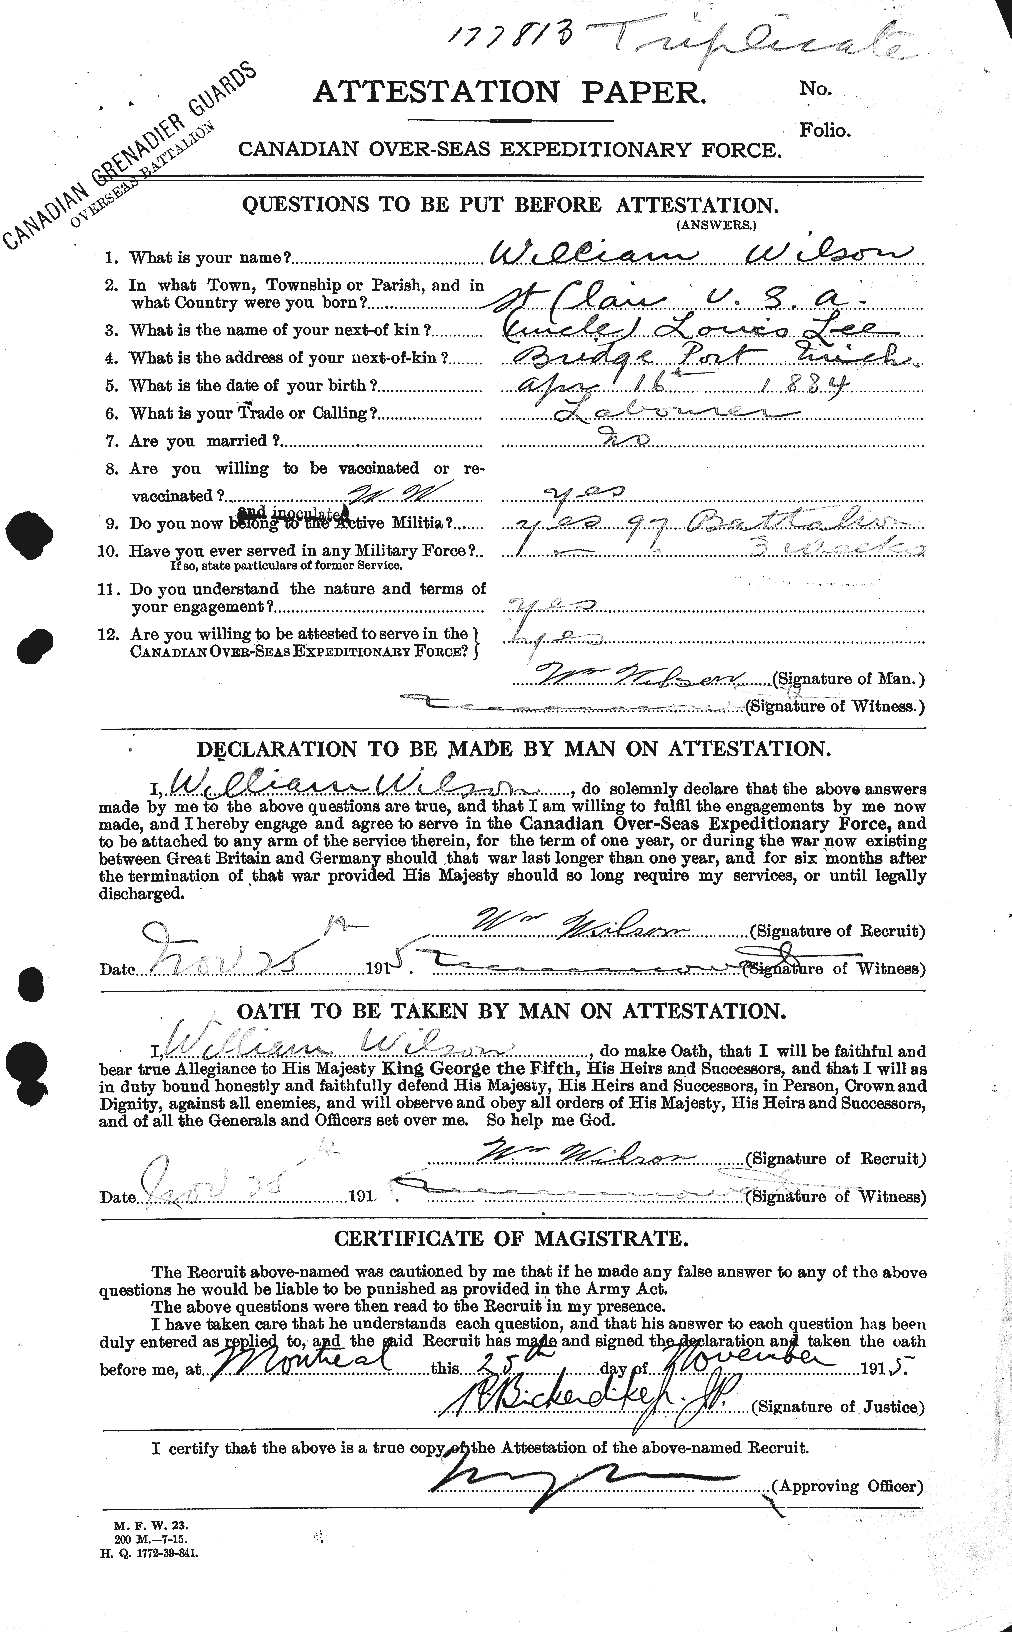 Personnel Records of the First World War - CEF 681892a